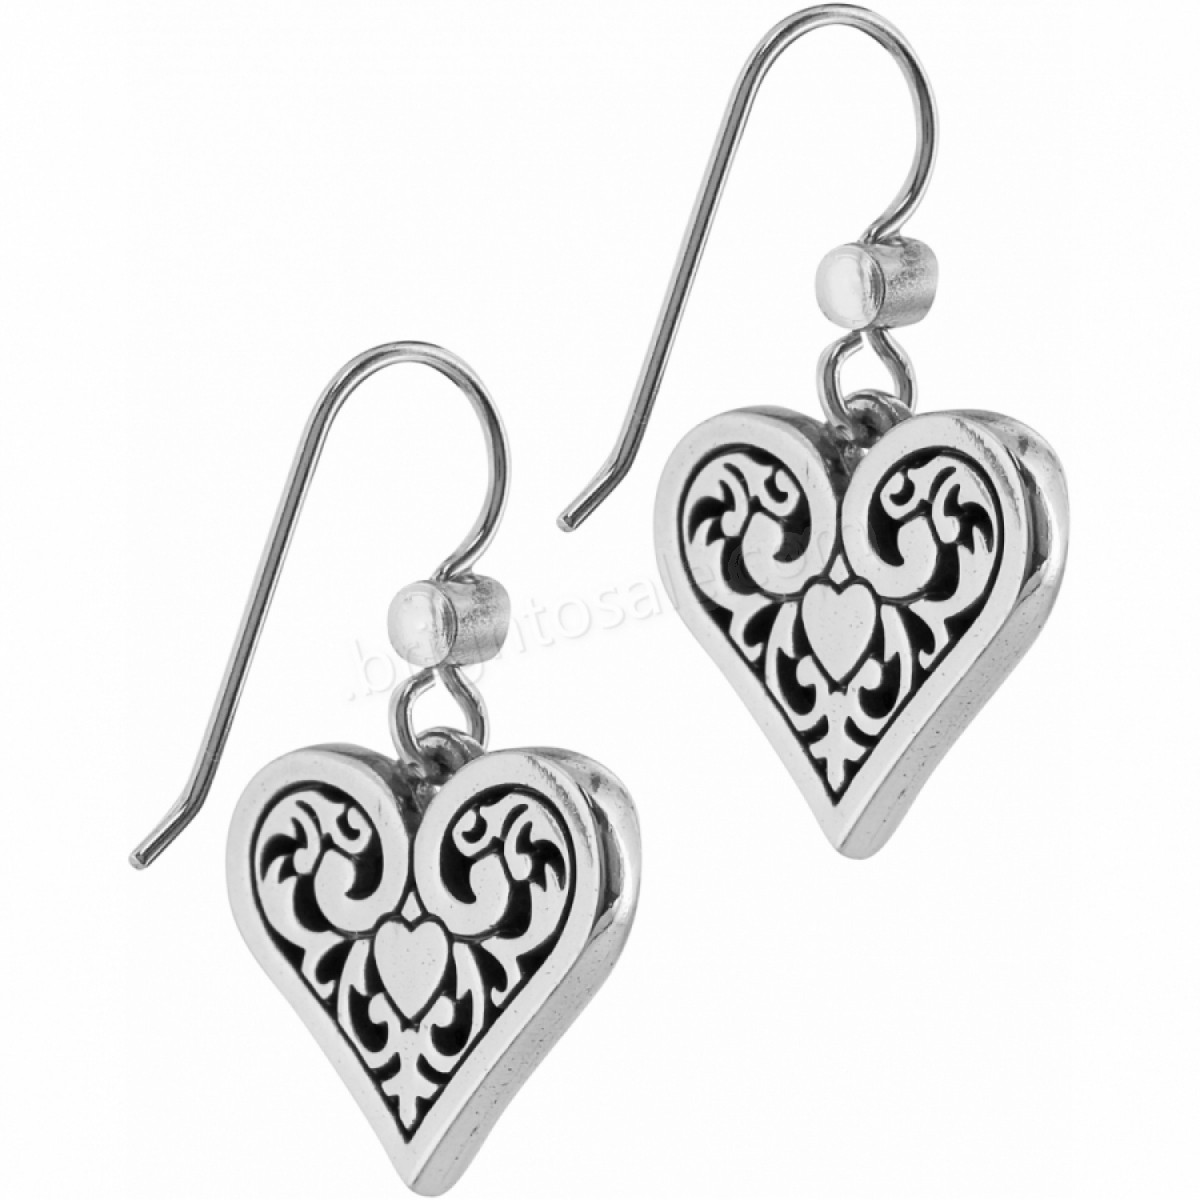 Brighton Collectibles & Online Discount Cristalina Heart French Wire Earrings - -1